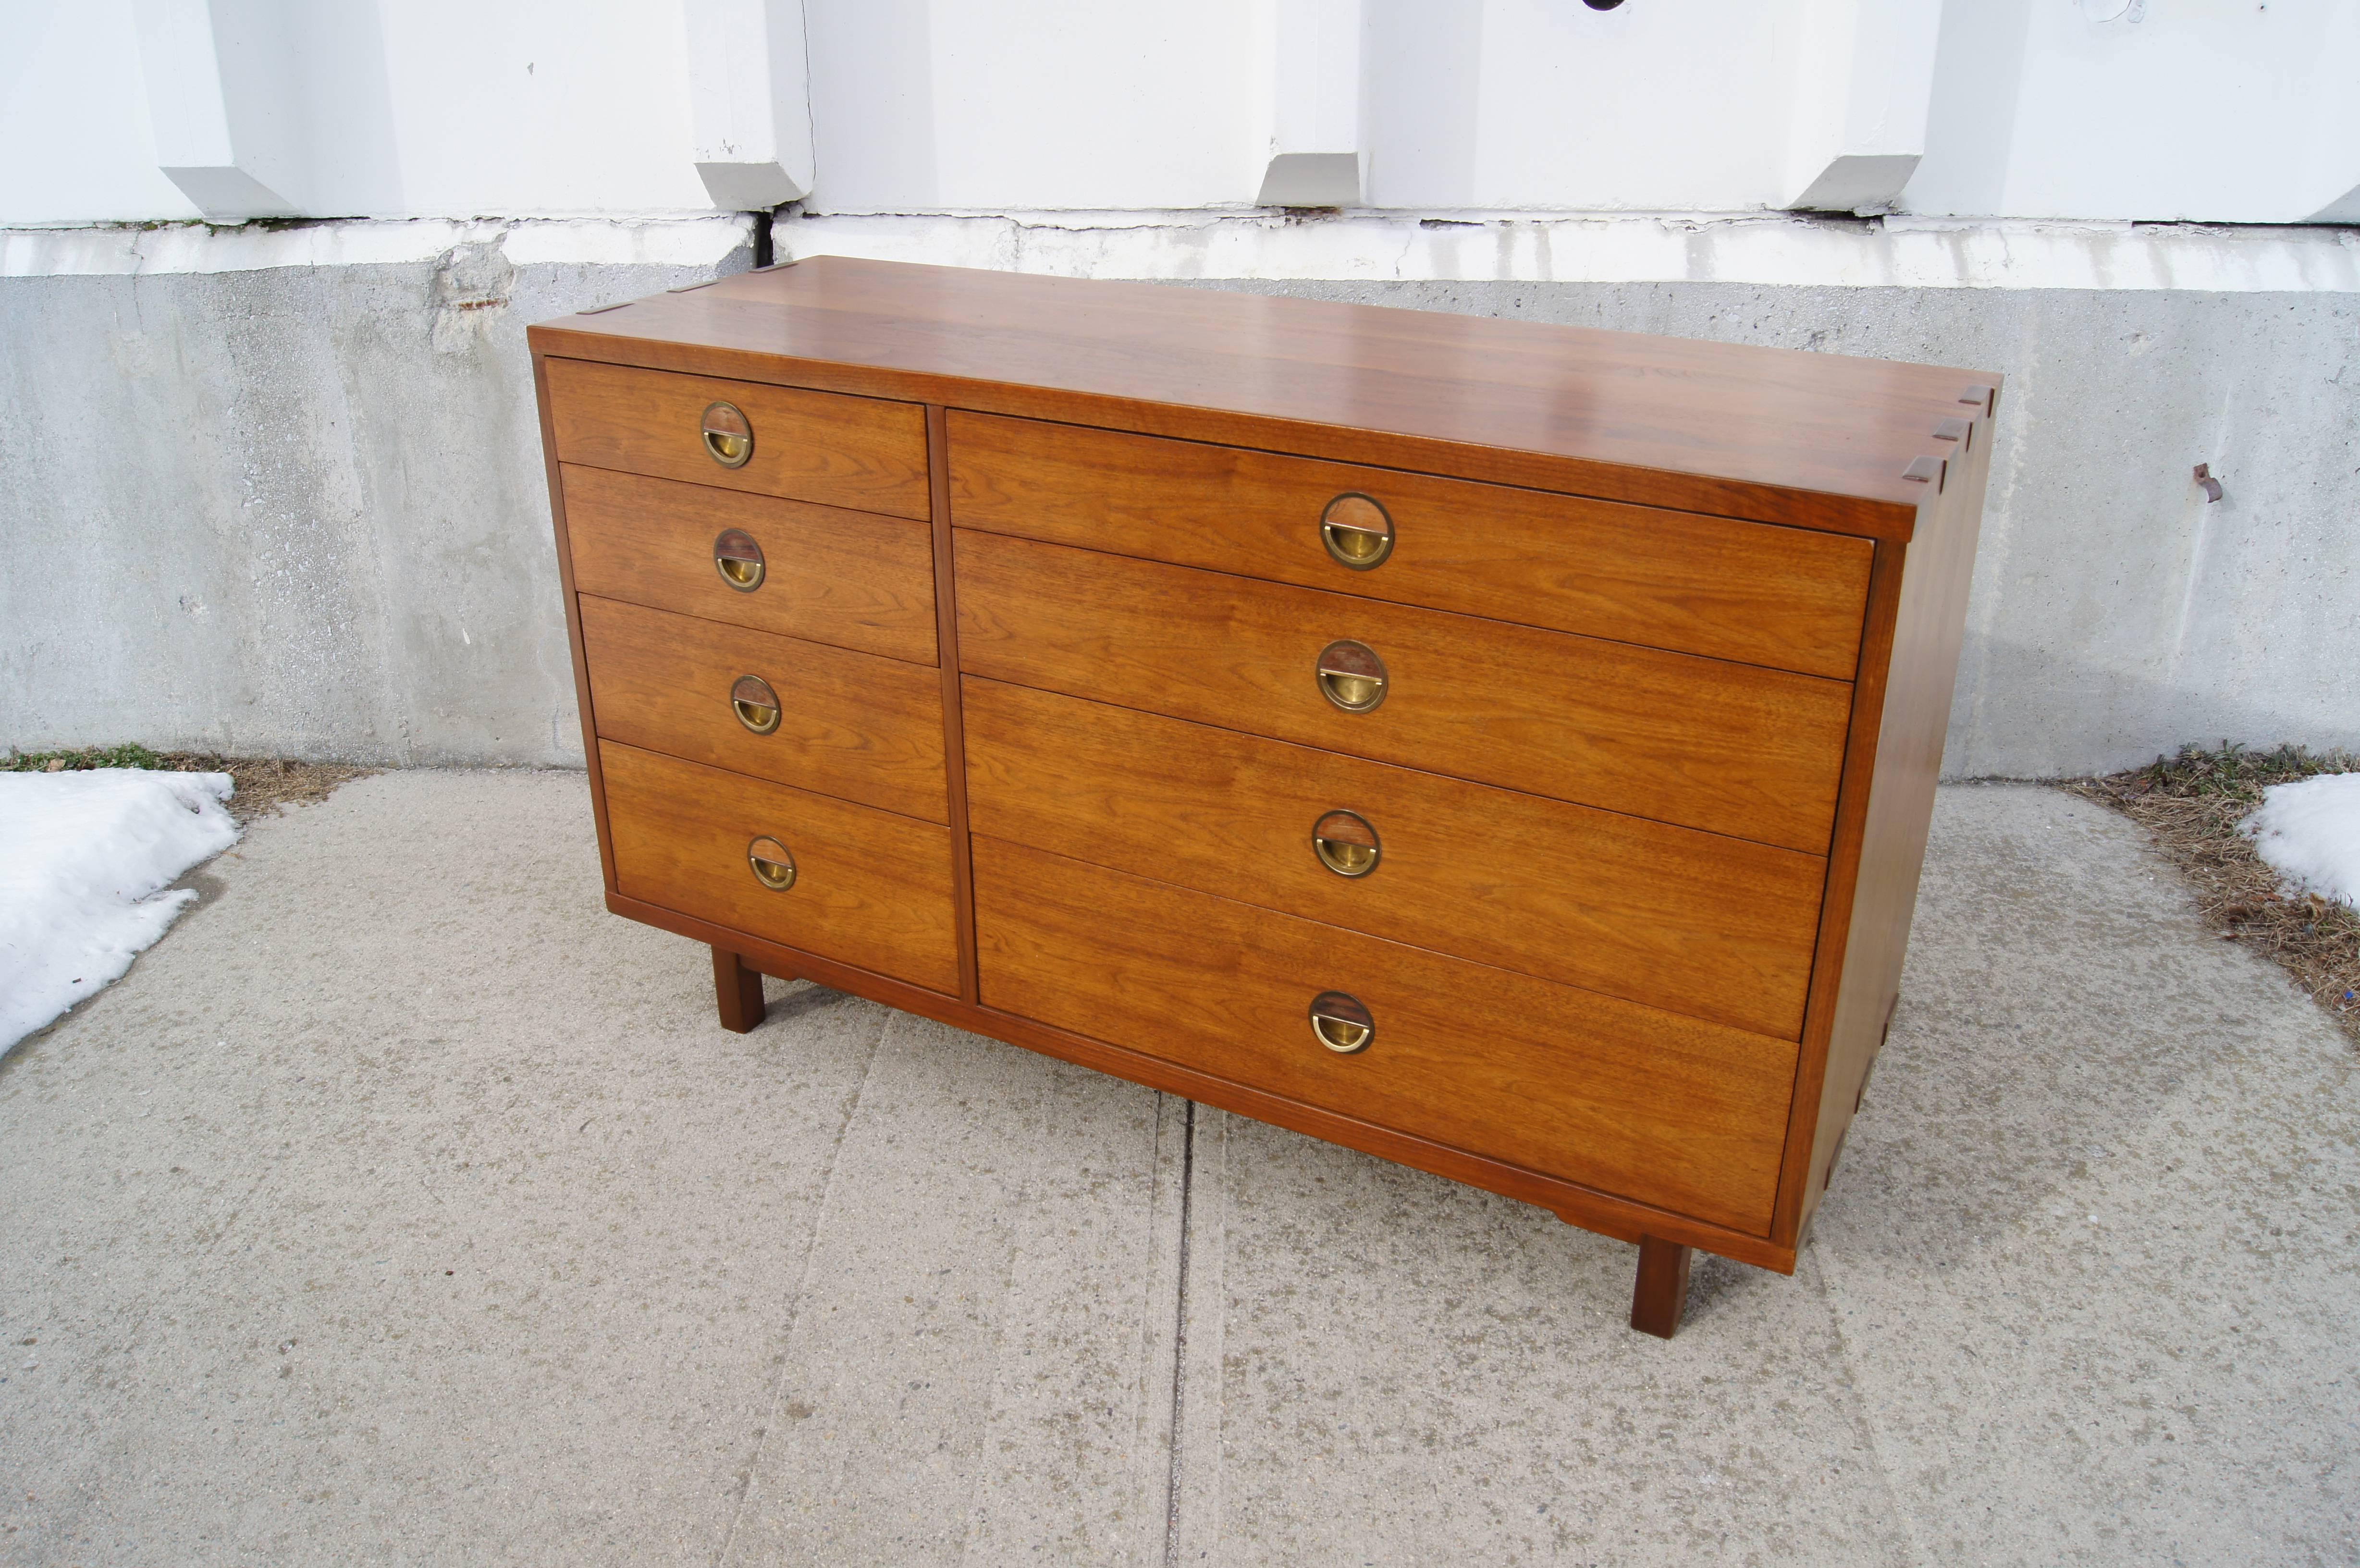 The eight drawers of this solid walnut dresser by Edward Wormley form an elegant asymmetry that is emphasized by the inset brass ring pulls. The sides feature bold overlapping finger joints. 